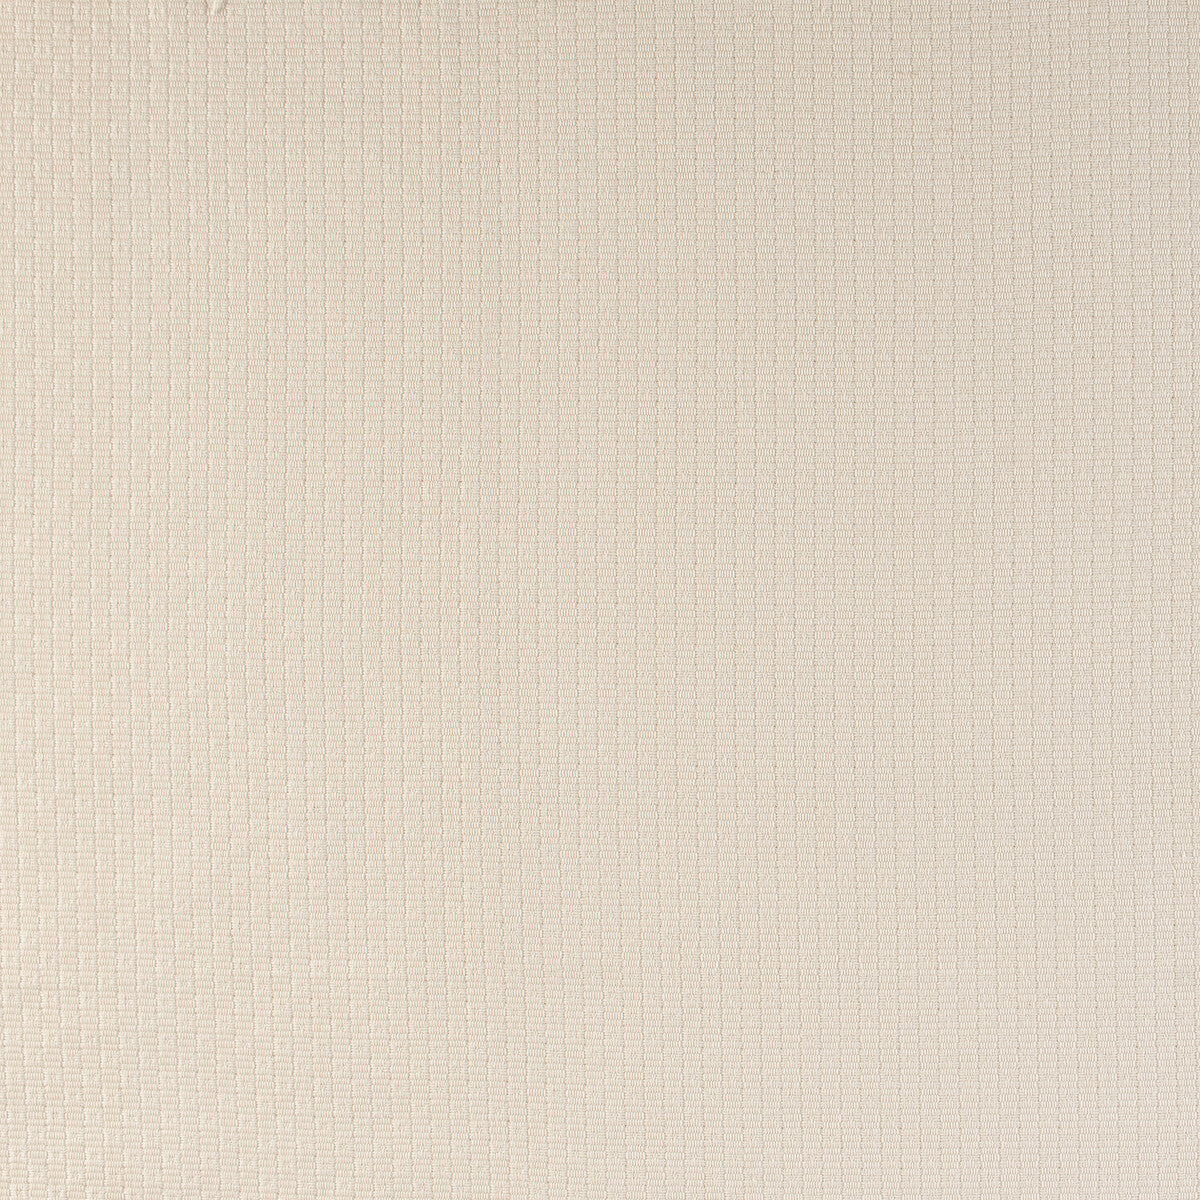 Square Knots fabric in ivory color - pattern 35908.1.0 - by Kravet Design in the Barbara Barry Home Midsummer collection